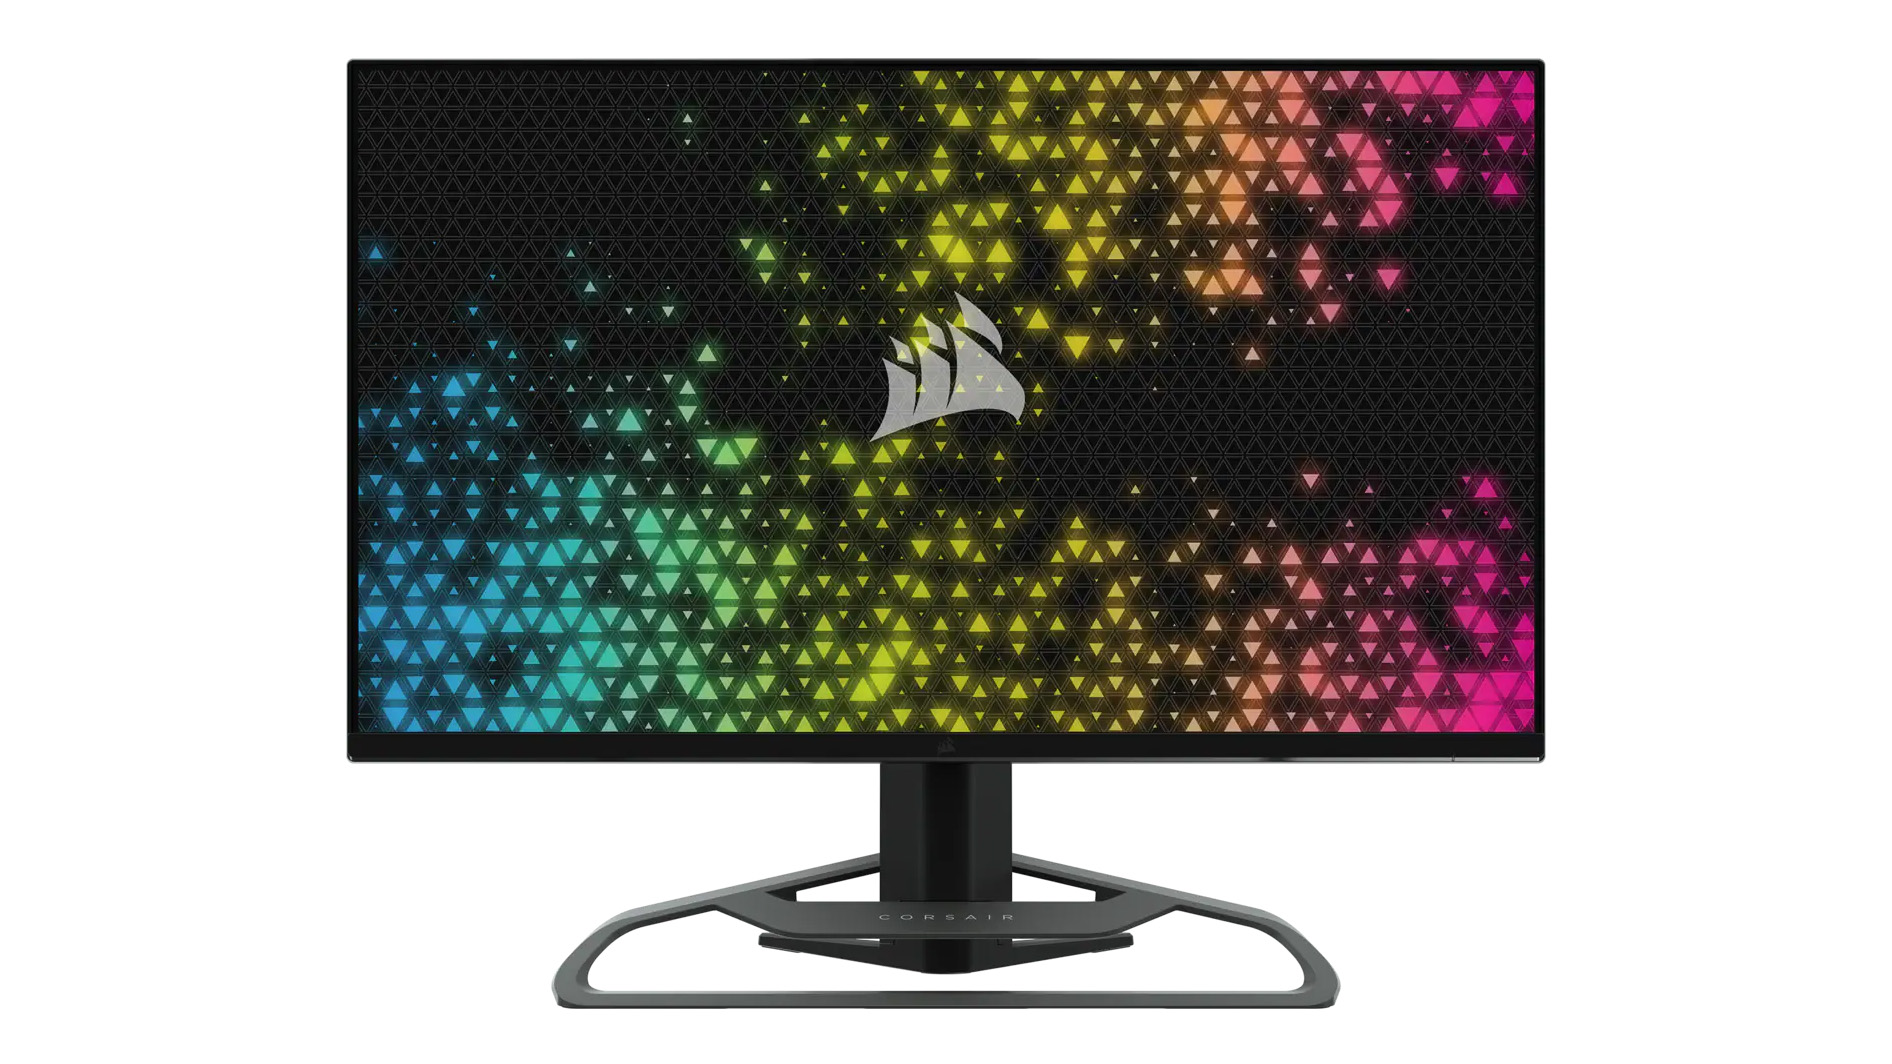 Product shot of Corsair Xeneon 32UHD144, one of the best monitors for PS5